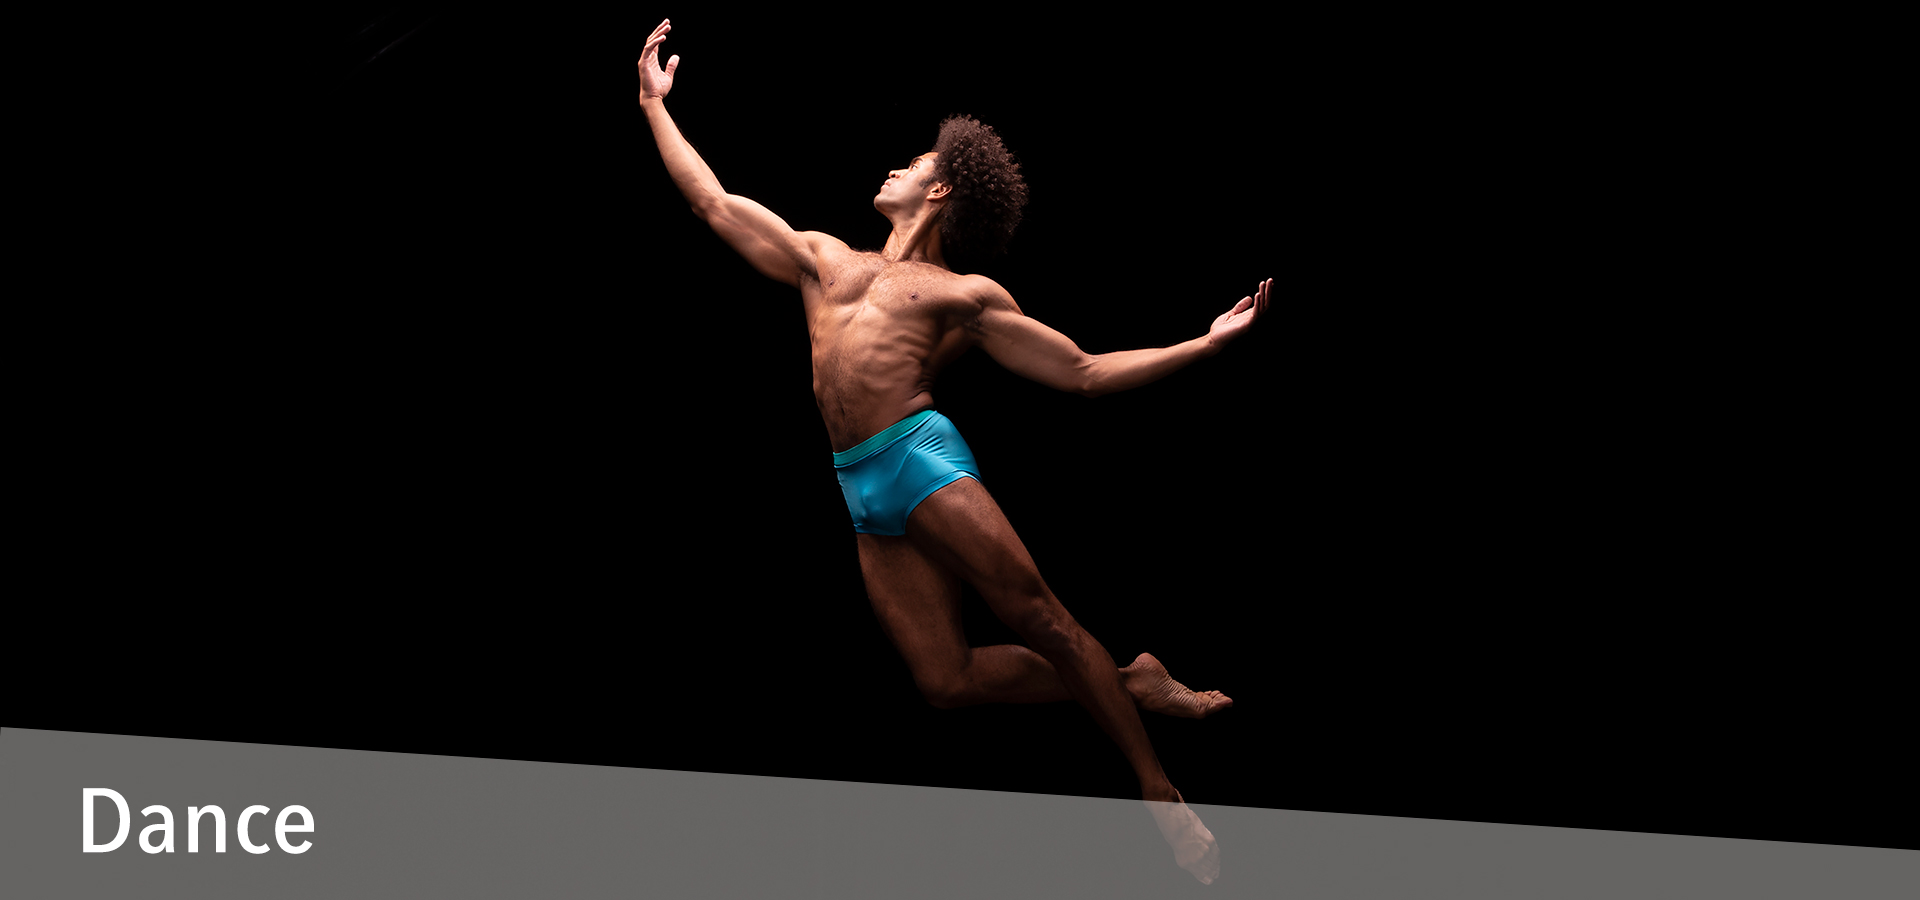 Ailvin Ailey American Dance Theater in our 2022/23 Dance Season